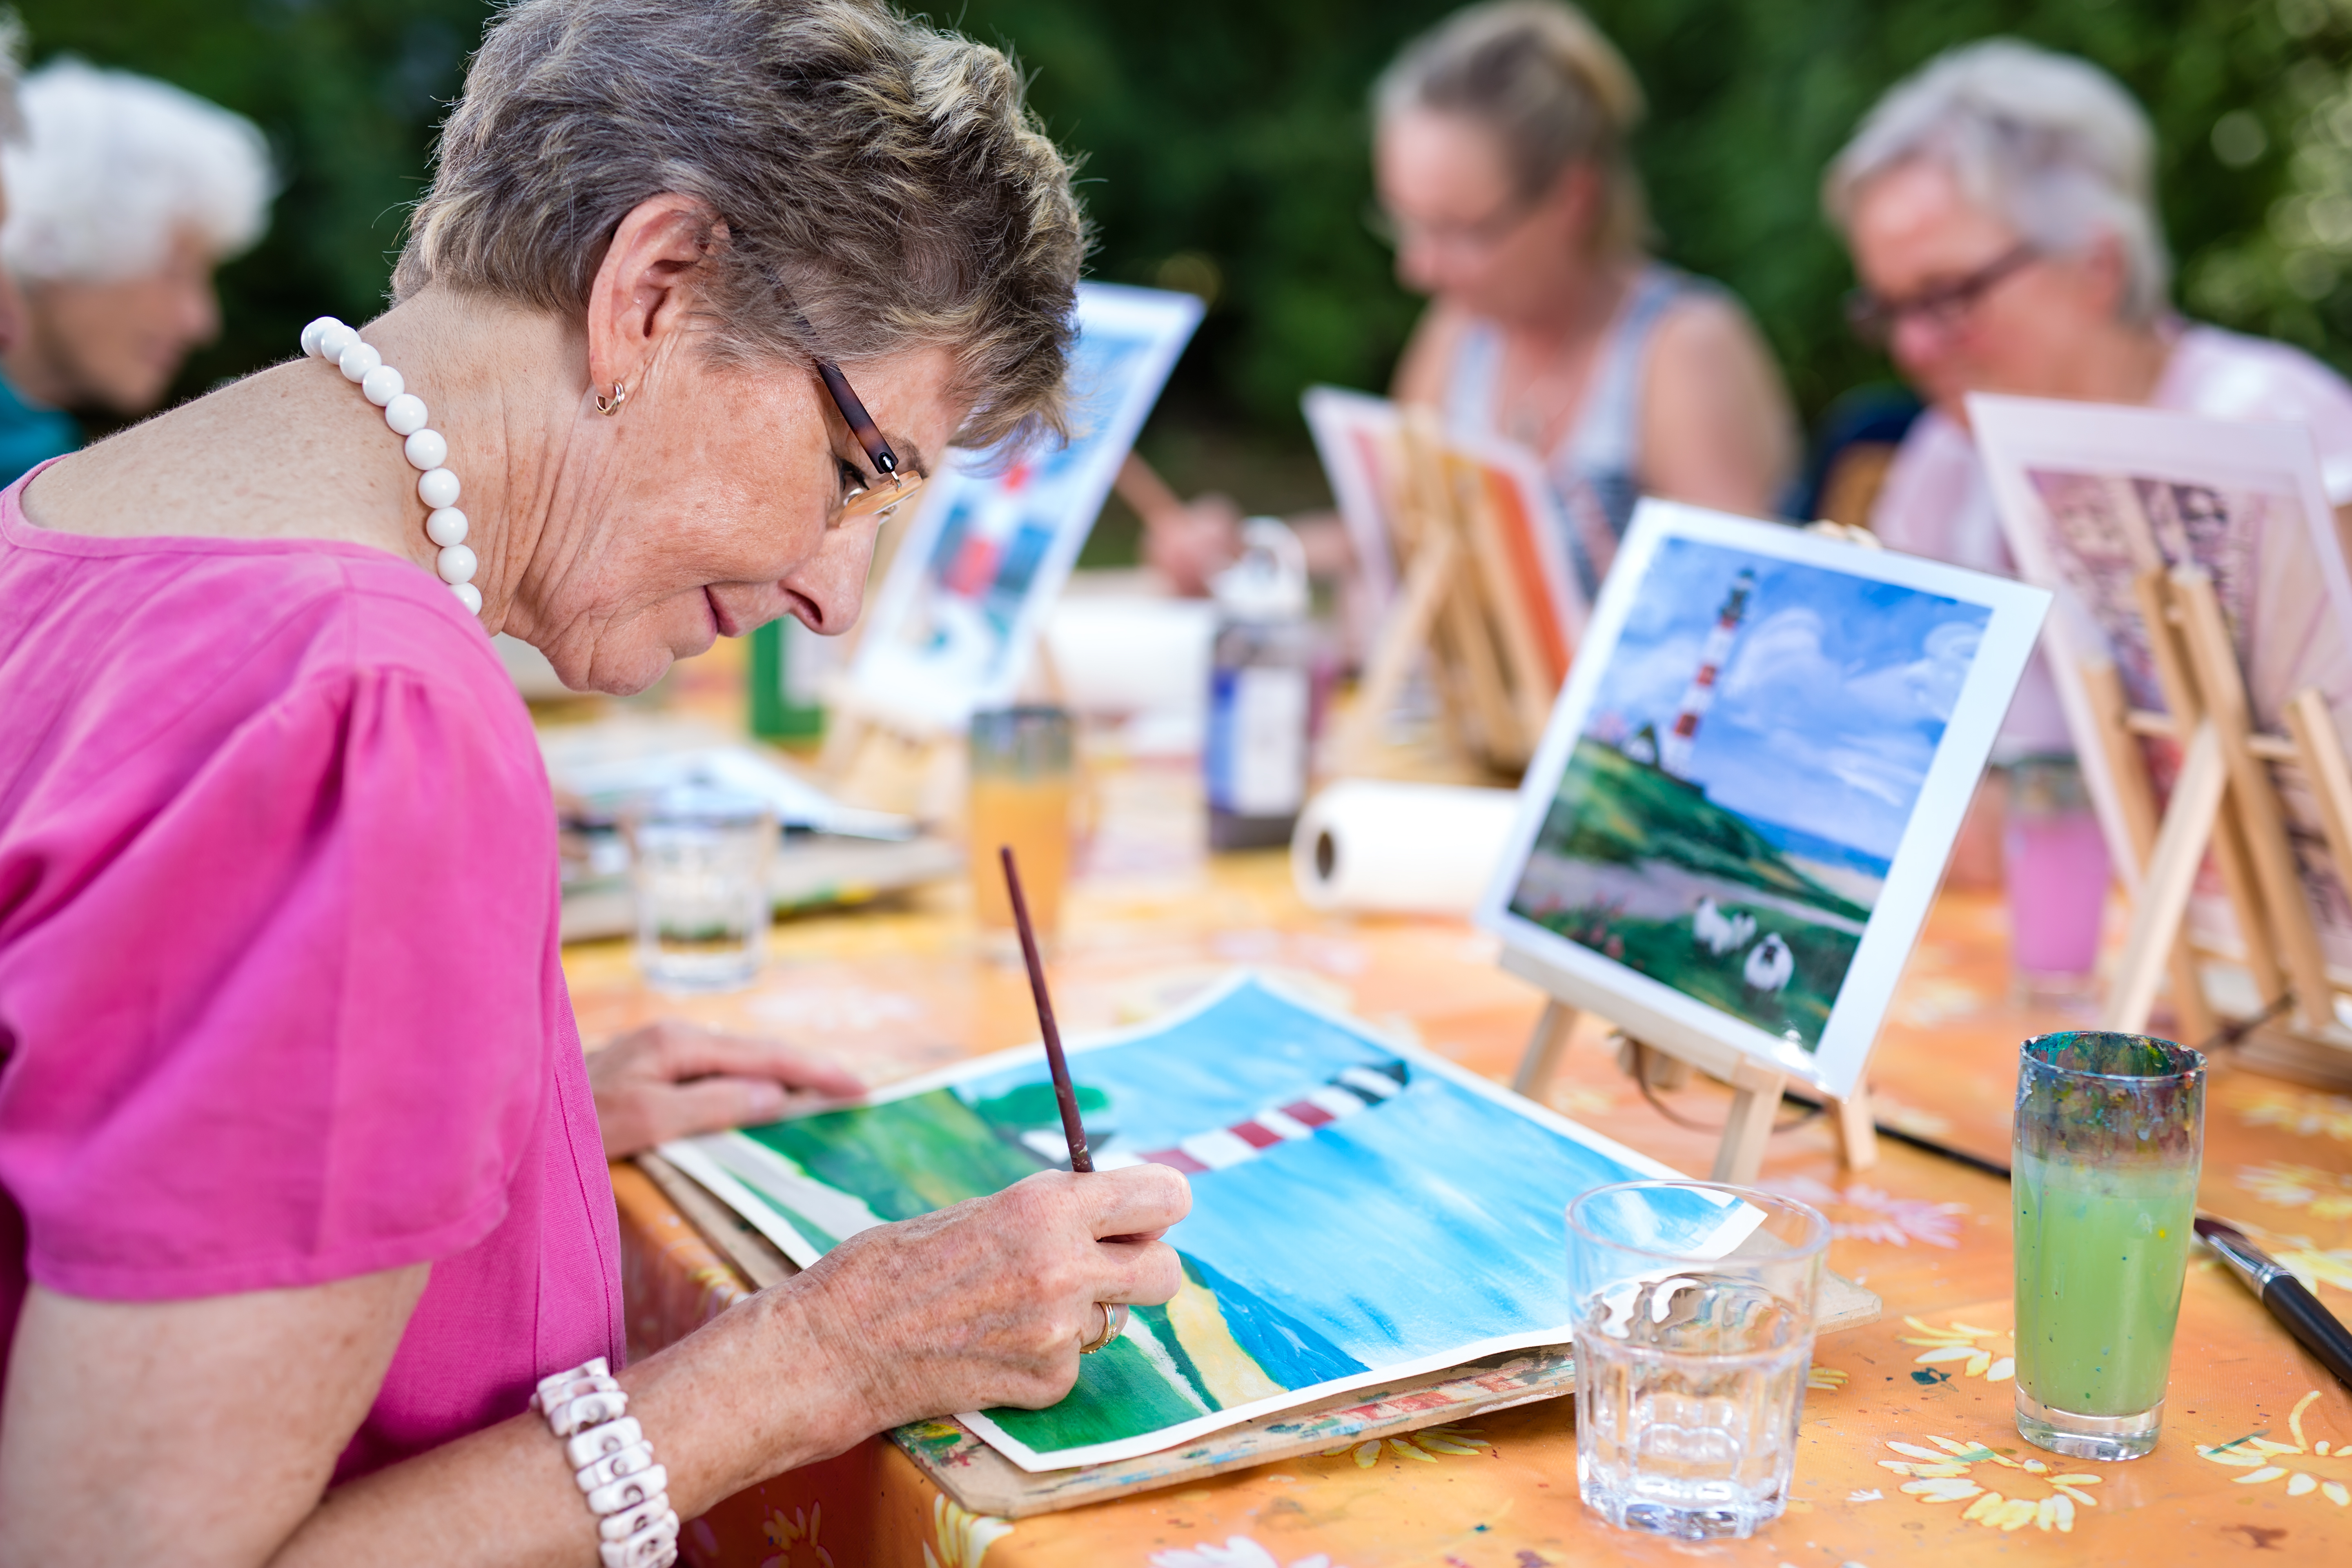 seniors enjoy painting together at a table